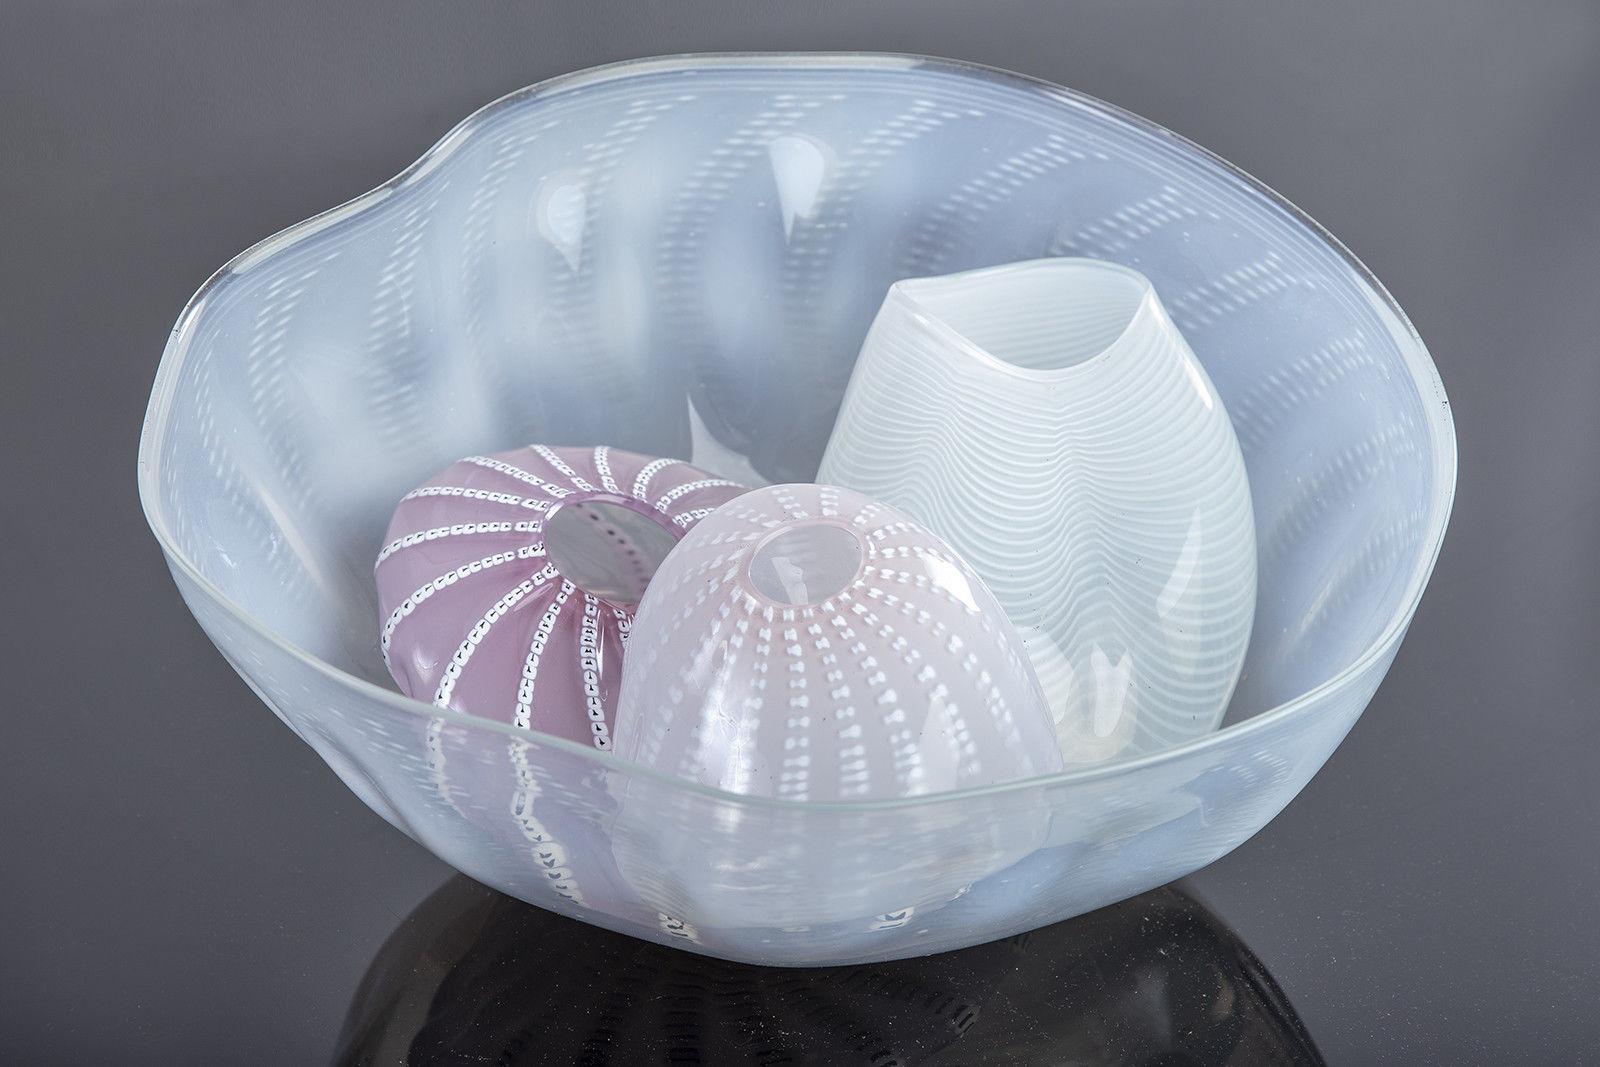 Artist: Dale Chihuly
Medium: Hand Blown Glass
Size: Largest 8" x 15 3/4"
Year: 1980
Signed: Inscribed by the Artist and Dated
Condition: Museum Quality Condition
Provenance: Gallery COA

Inspired by Northwest Coast Indian baskets he sees at the